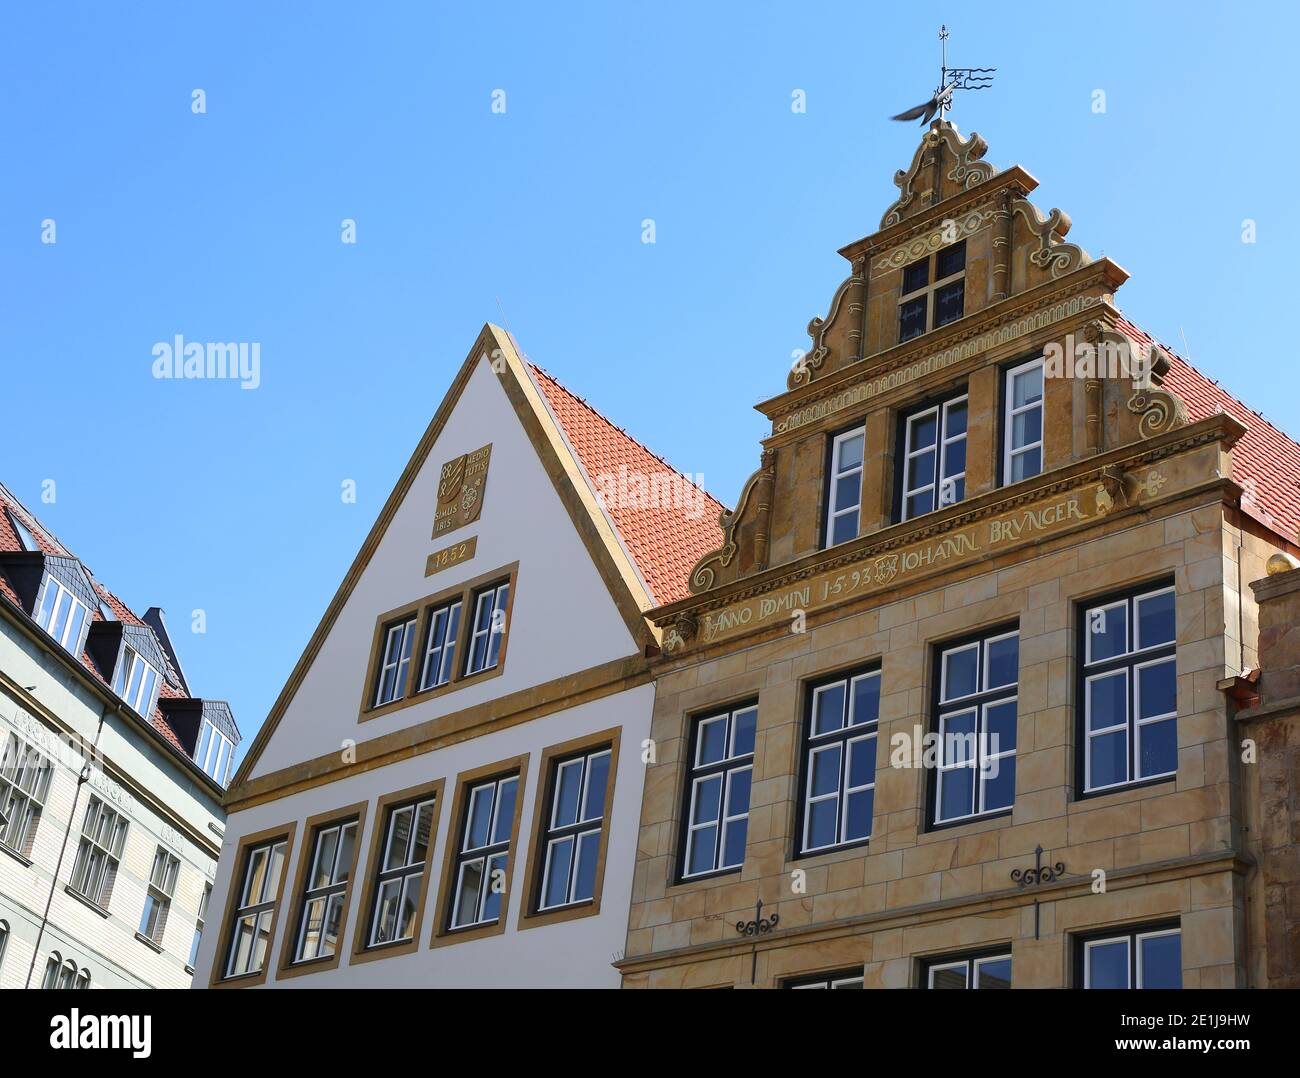 Details of Old Historic Buildings in Bielefeld,Germany Stock Photo